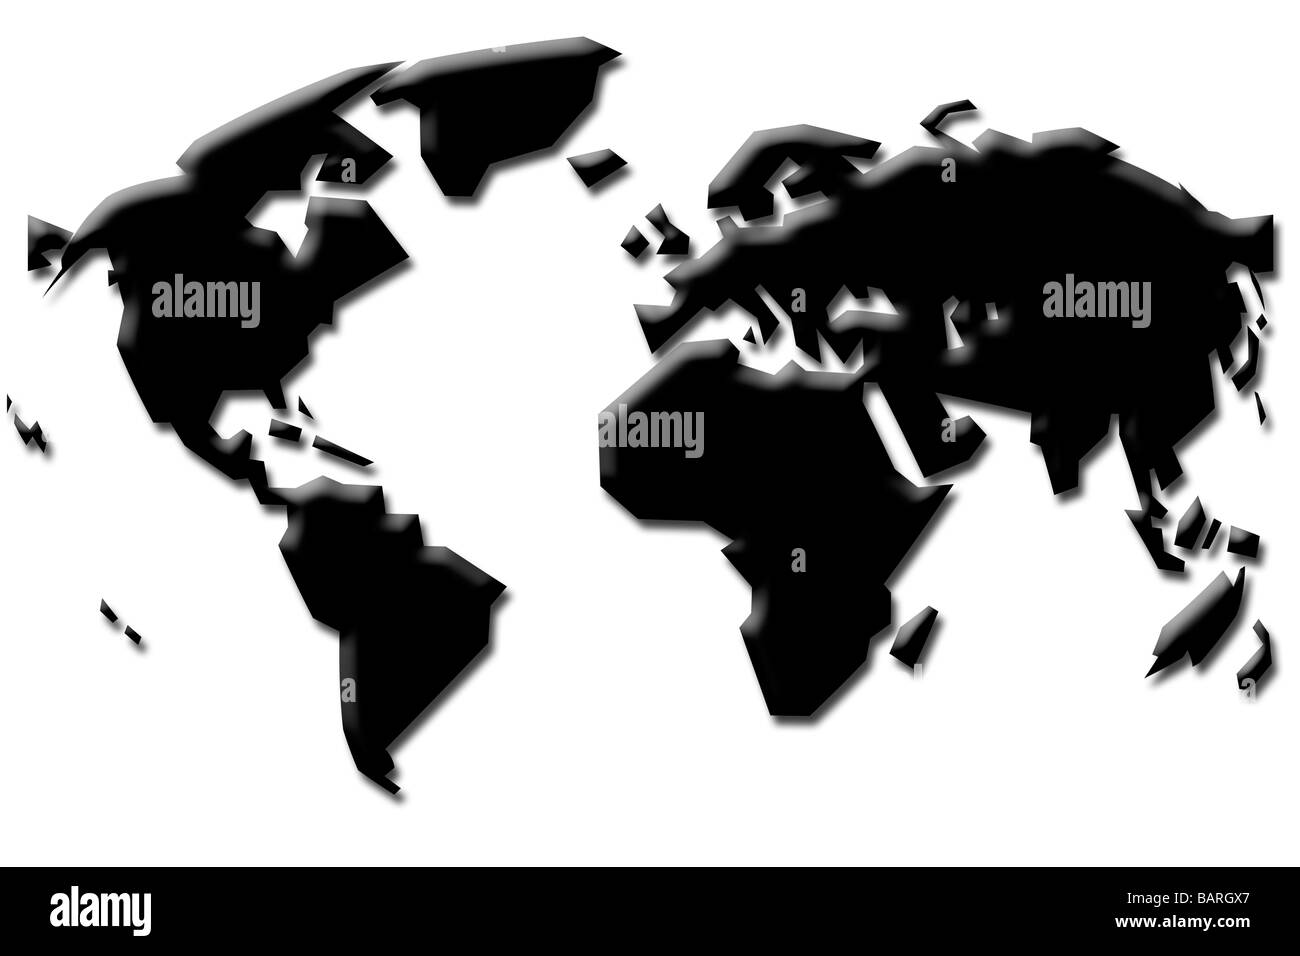 World capitals Black and White Stock Photos & Images - Alamy